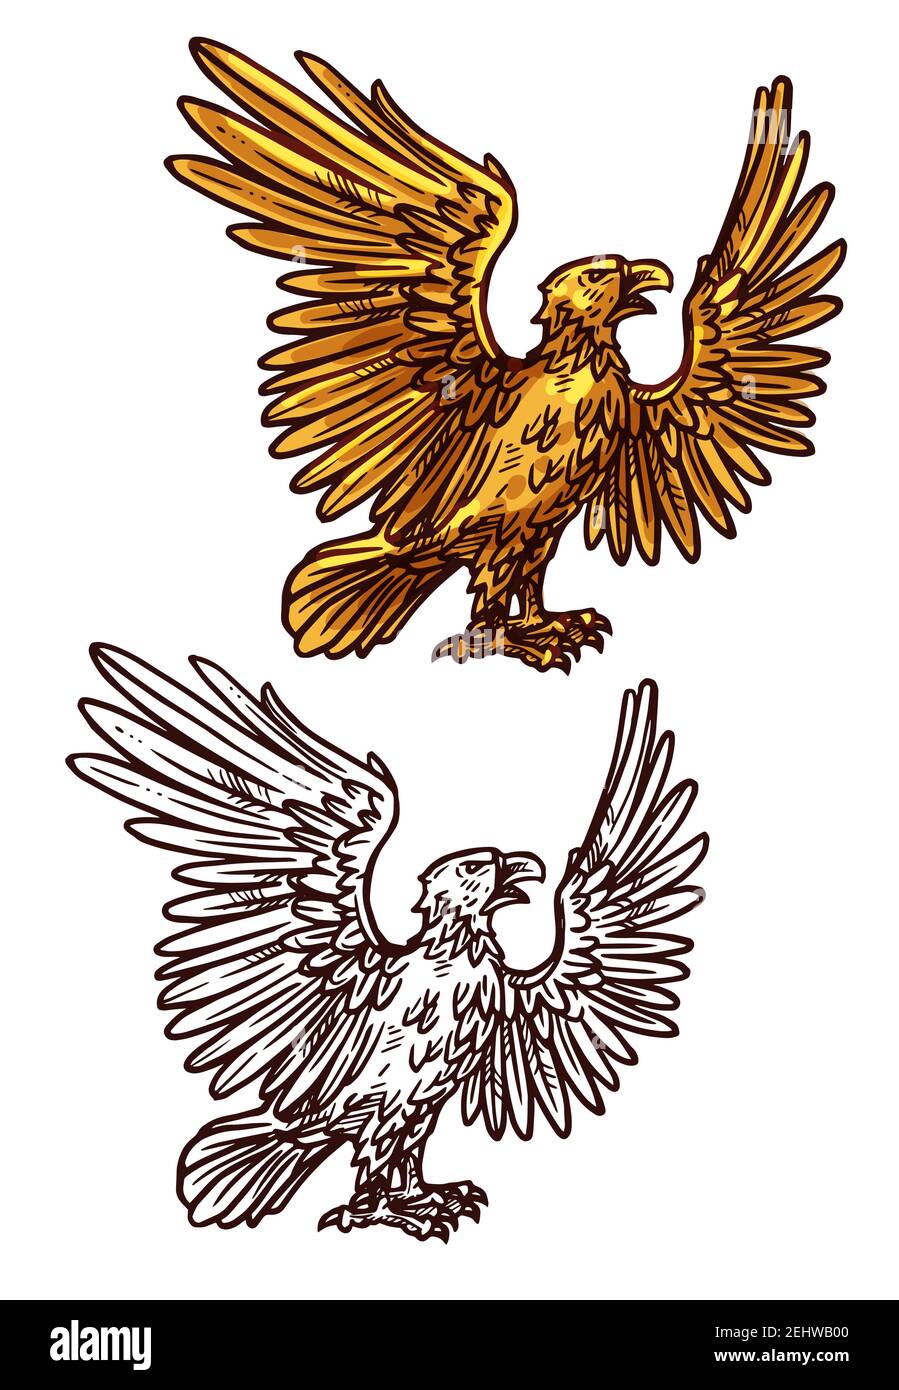 Eagle victory and power mascot. Vector heraldic golden element. Mythical bird or griffin with spread golden wings and sharp claws as symbol of strengt Stock Vector